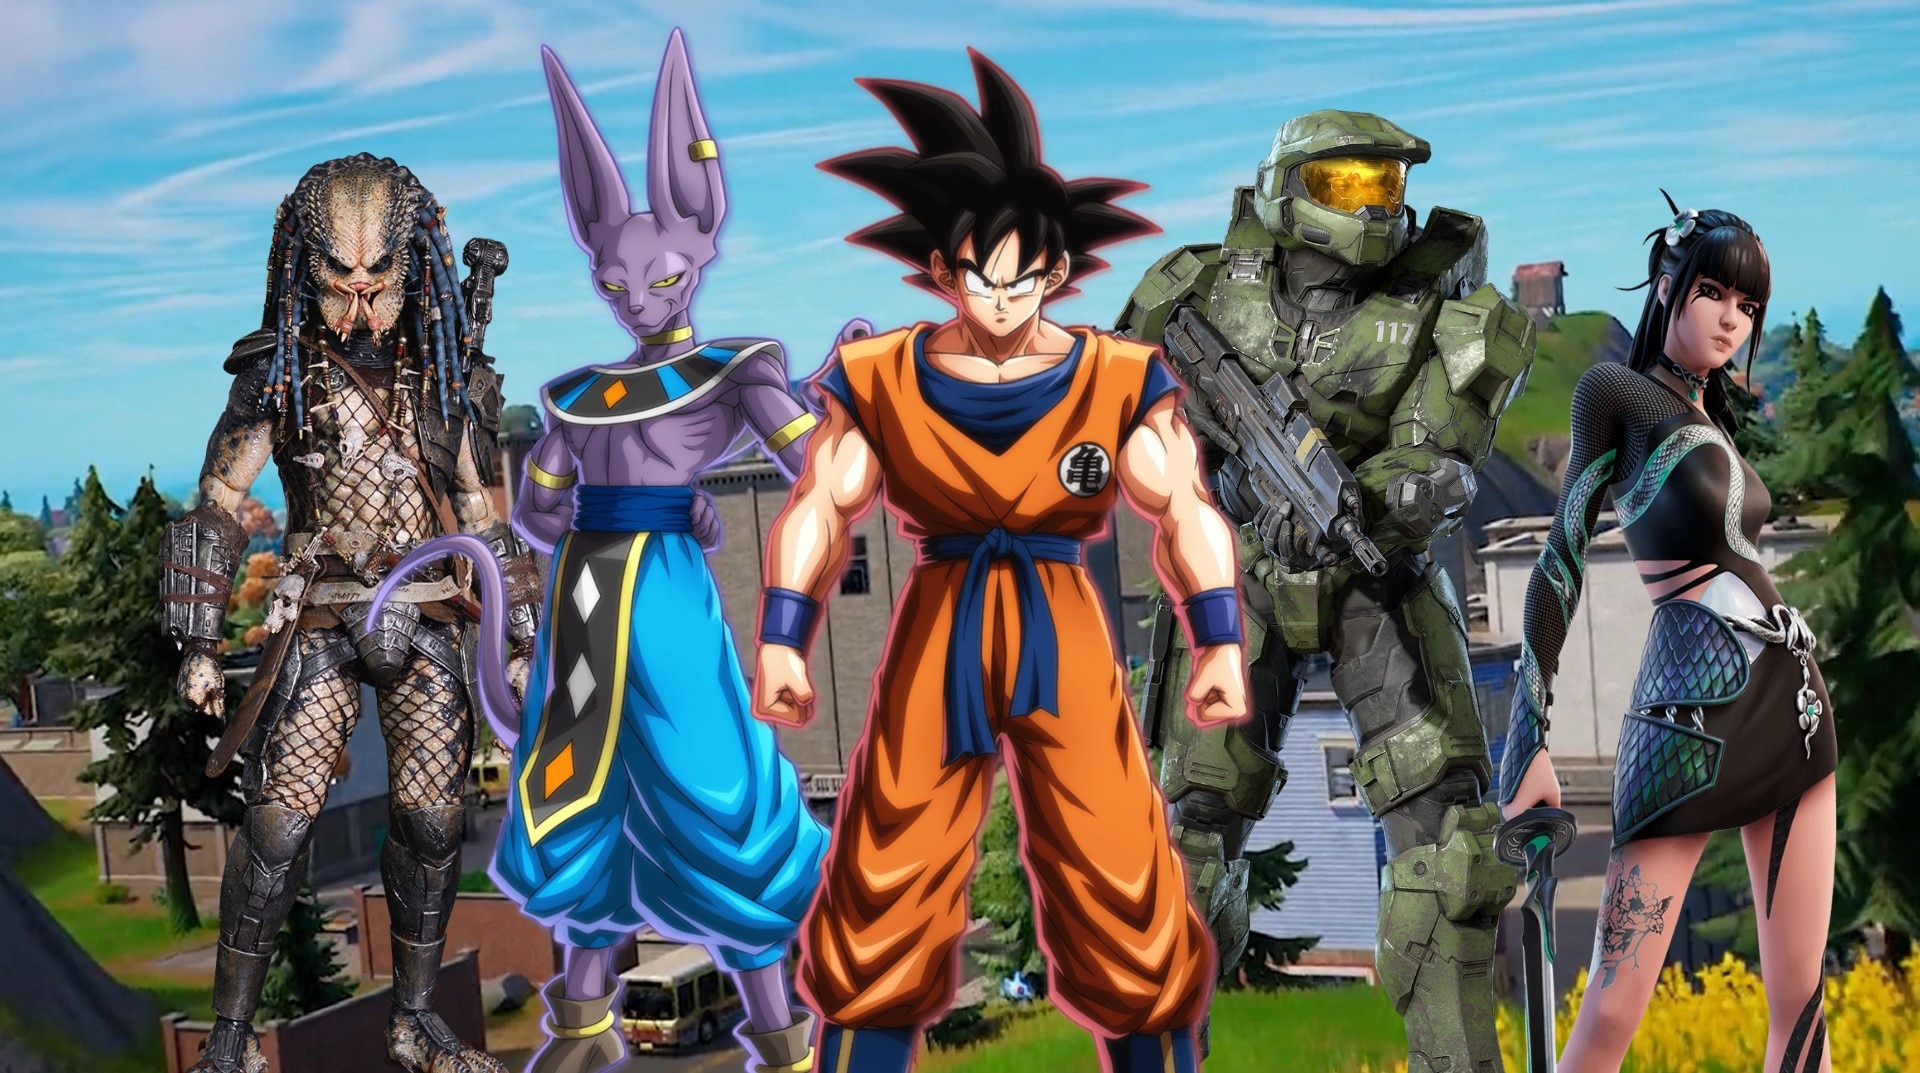 Who do you guys think will be the remaining Dragon Ball Super Super Hero  characters for DLC 15 and 16? : r/dbxv